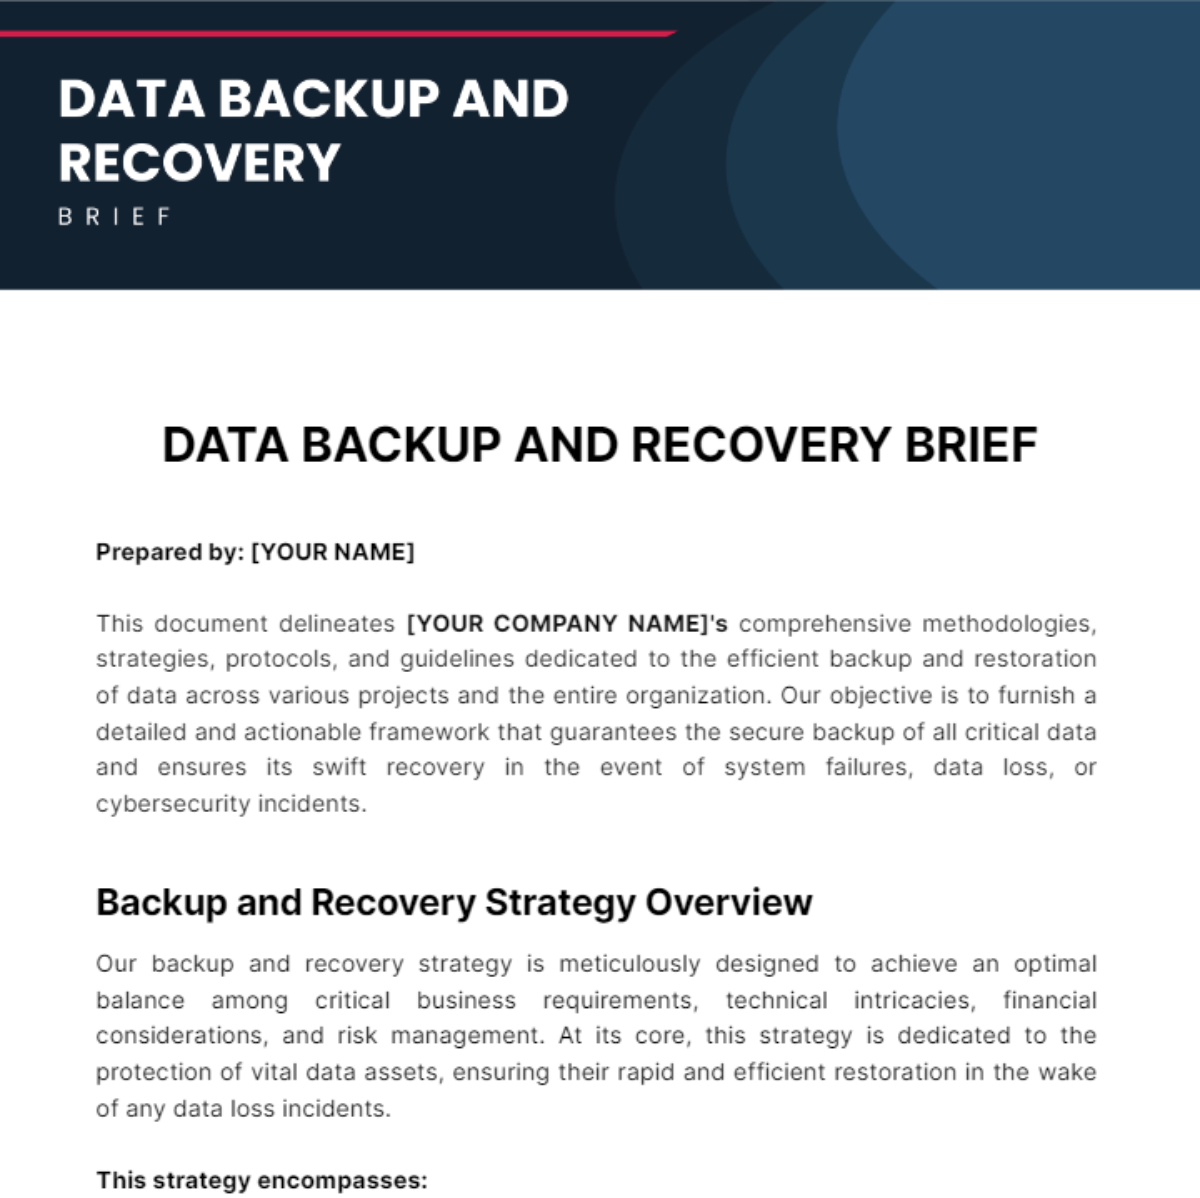 Data Backup and Recovery Brief Template